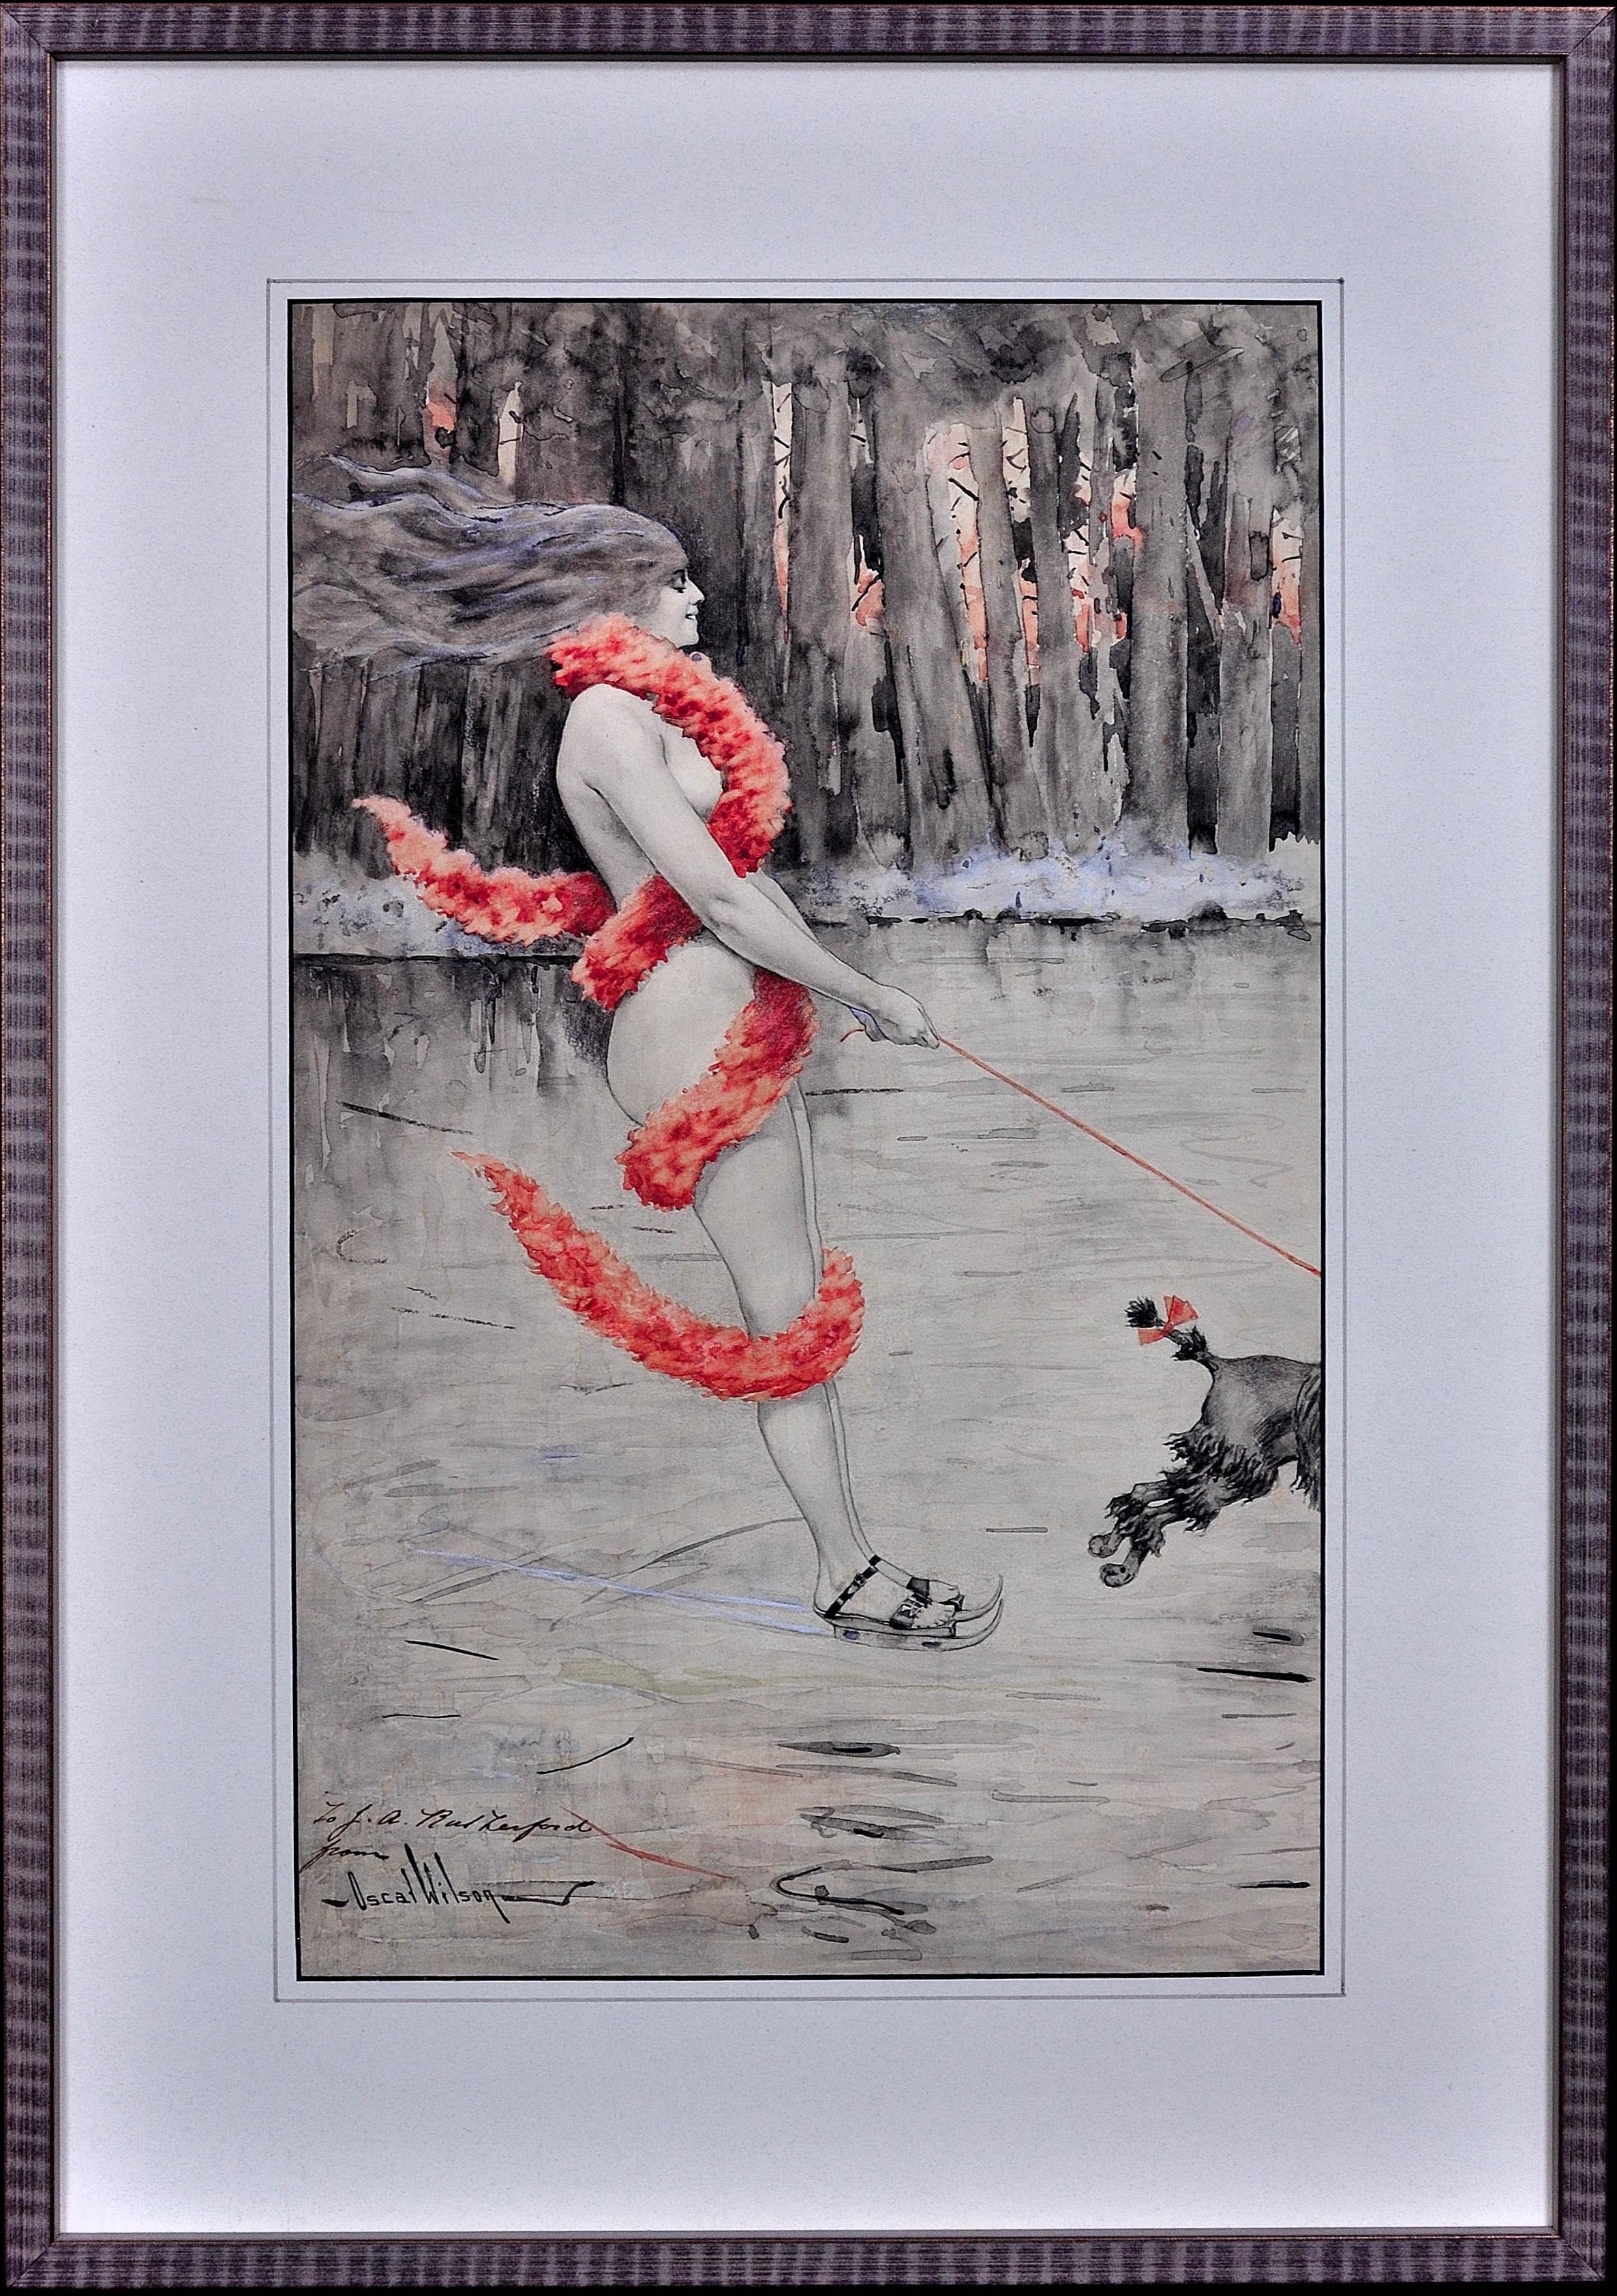 Oscar Wilson Animal Art - The Lady of the Lake.Naked Lady with Red Boa Skating Poodle Art Nouveau Such Fun